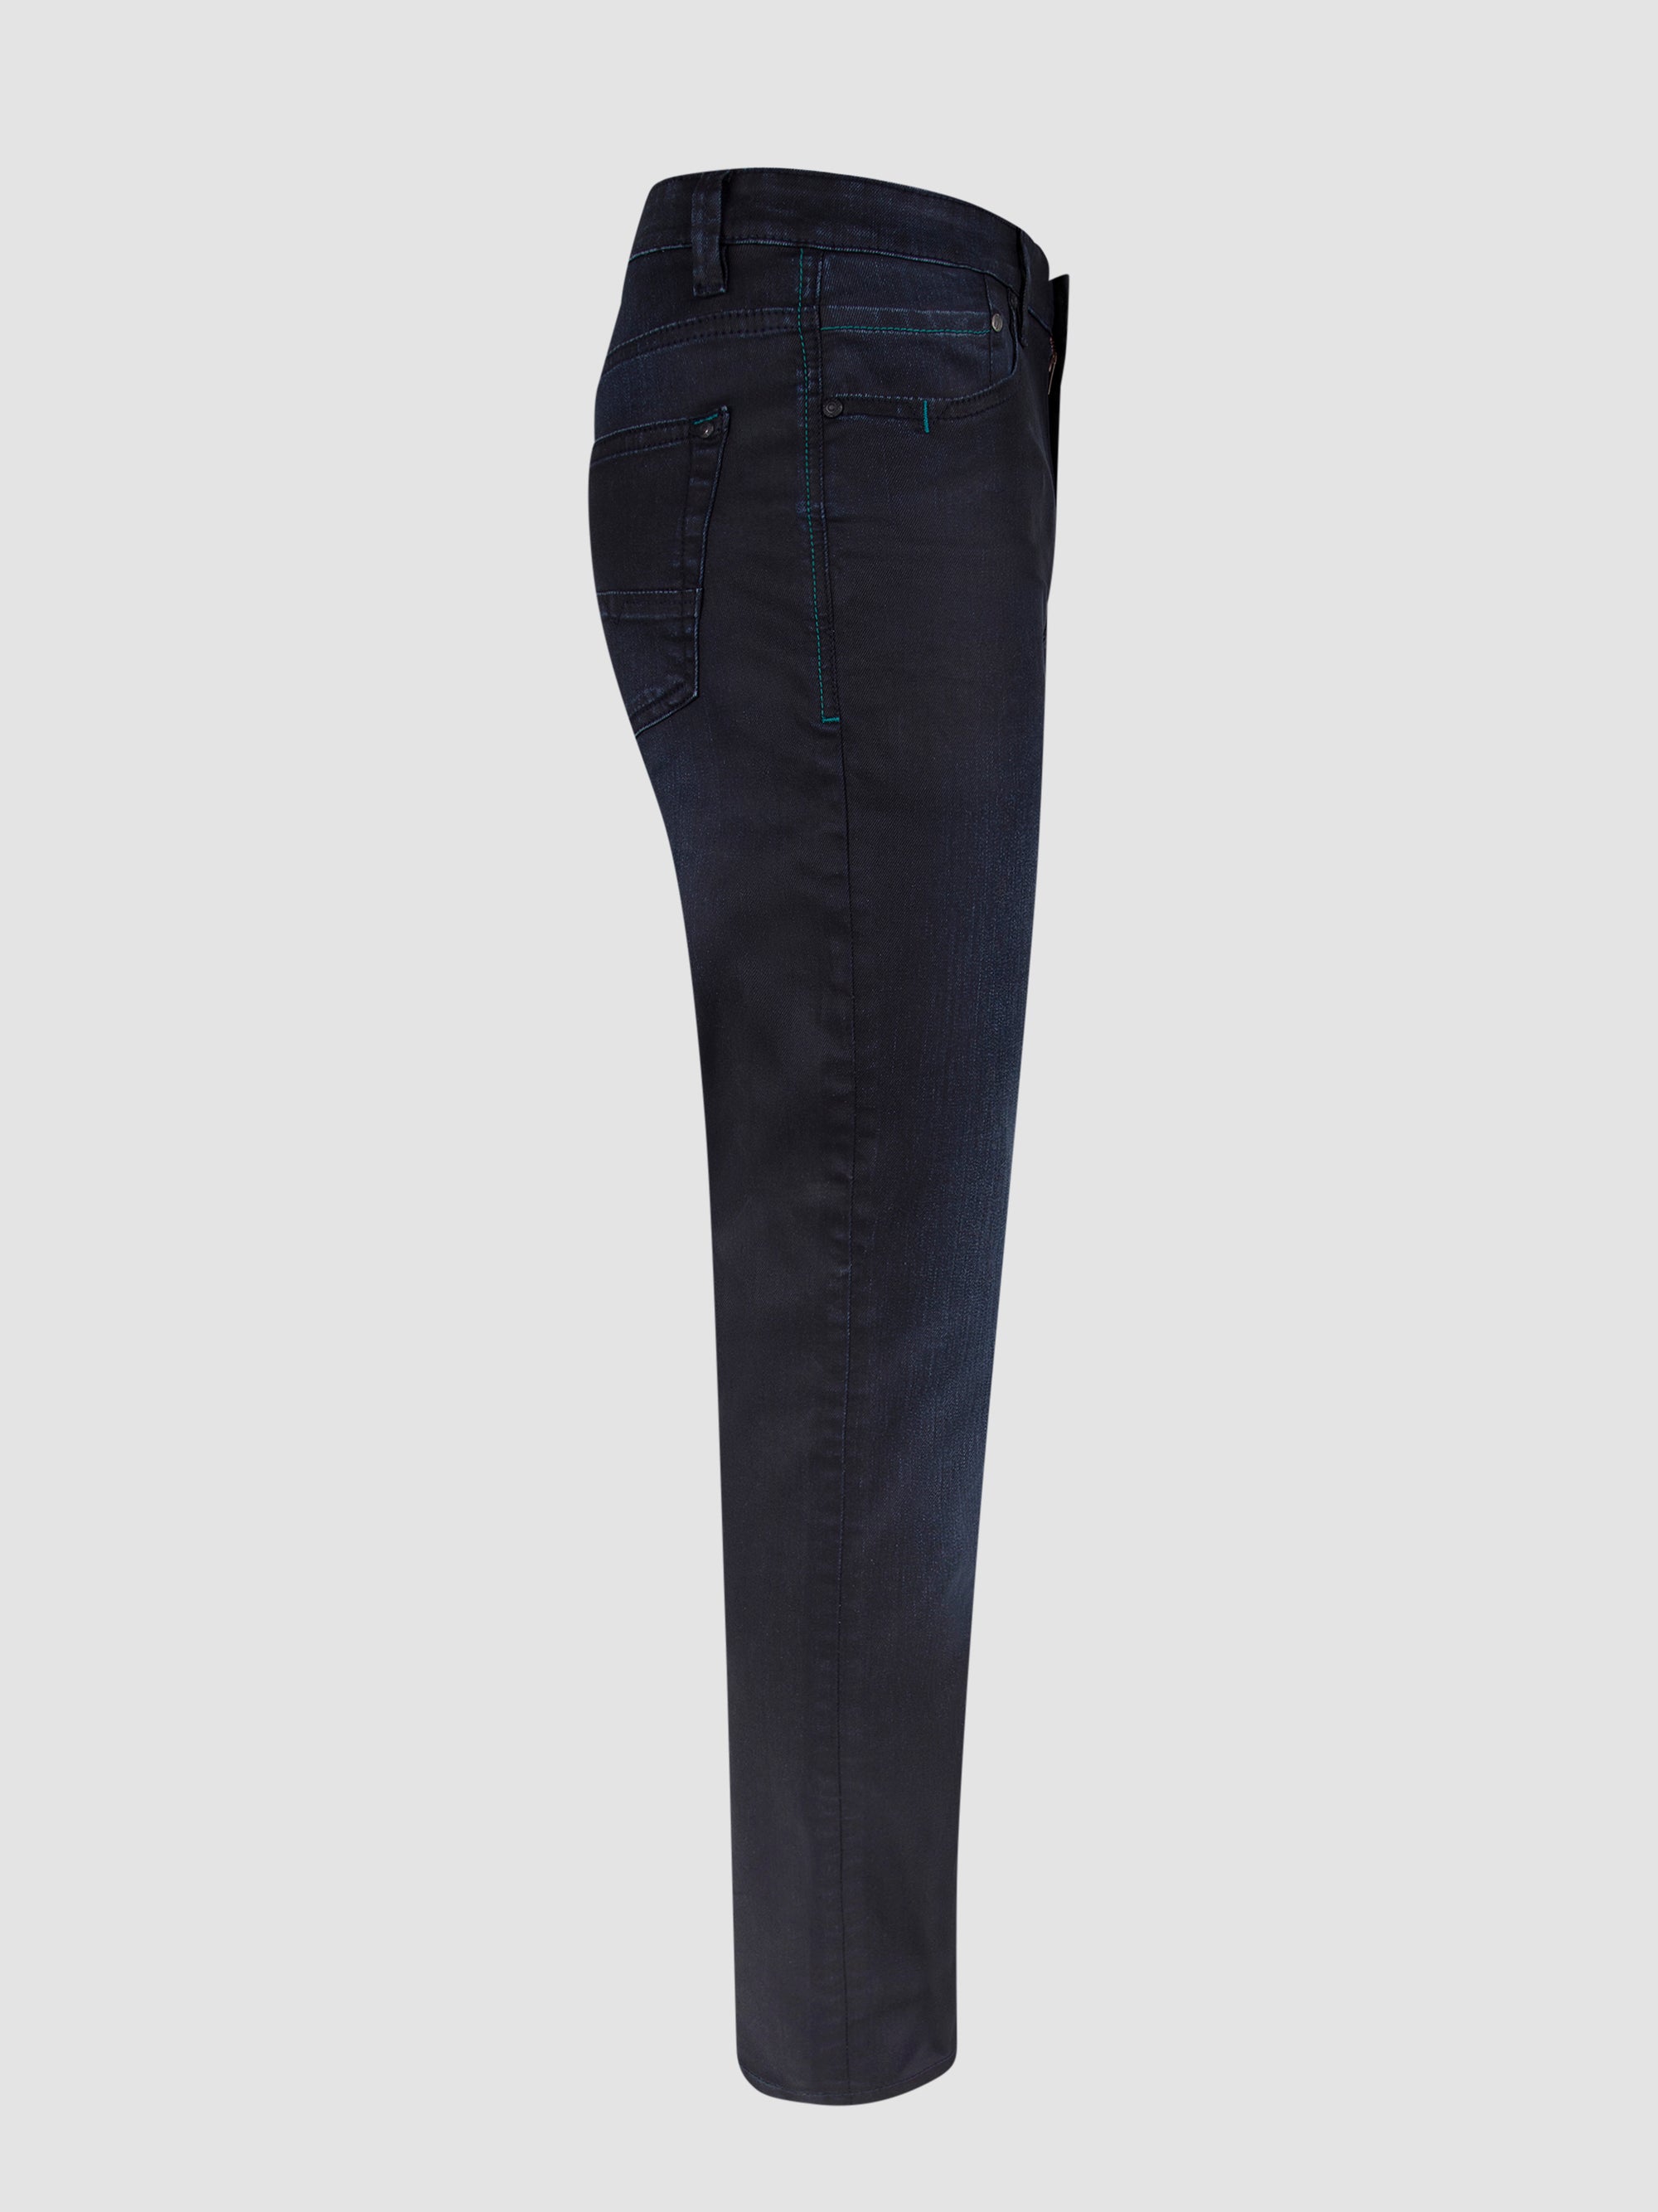 Tapered Fit Mid Stretch Cherokee Navy Resin Denim Jeans